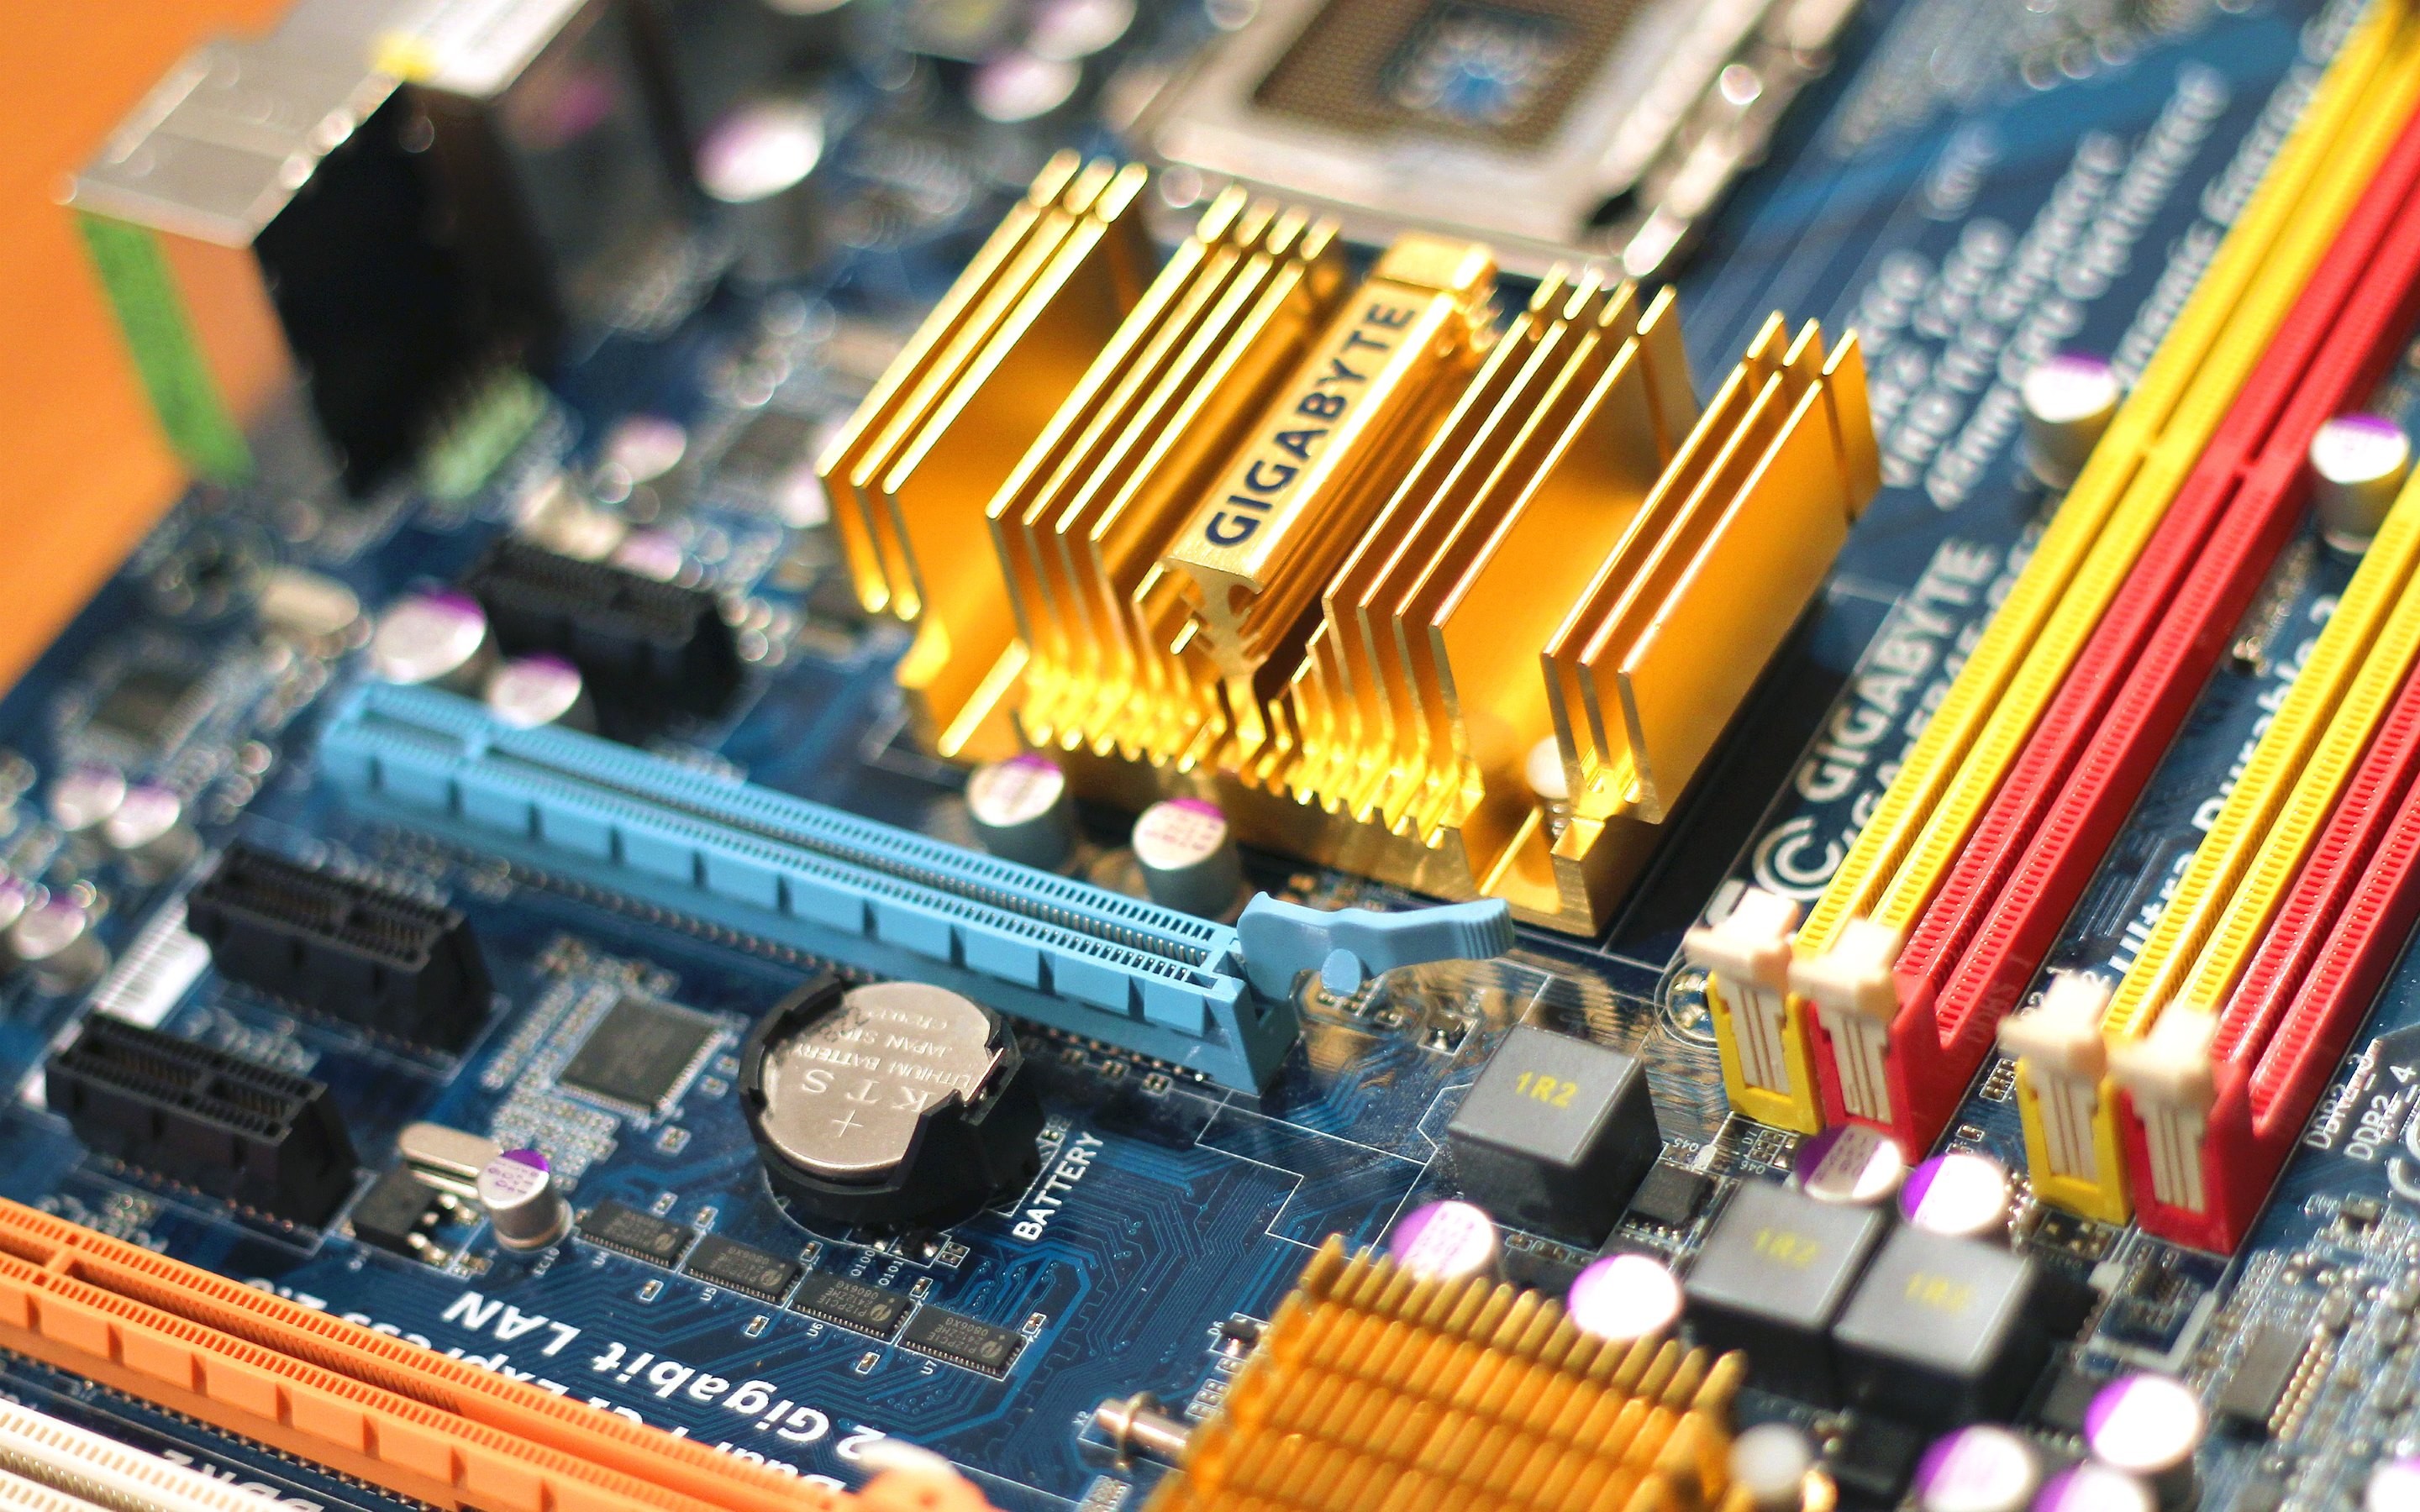 2880x1800 Gigabyte Motherboard in this free HD wallpaper Â· This is a free picture  listed under the Computers collection for Tech enthusiasts especially Â·  Download ...